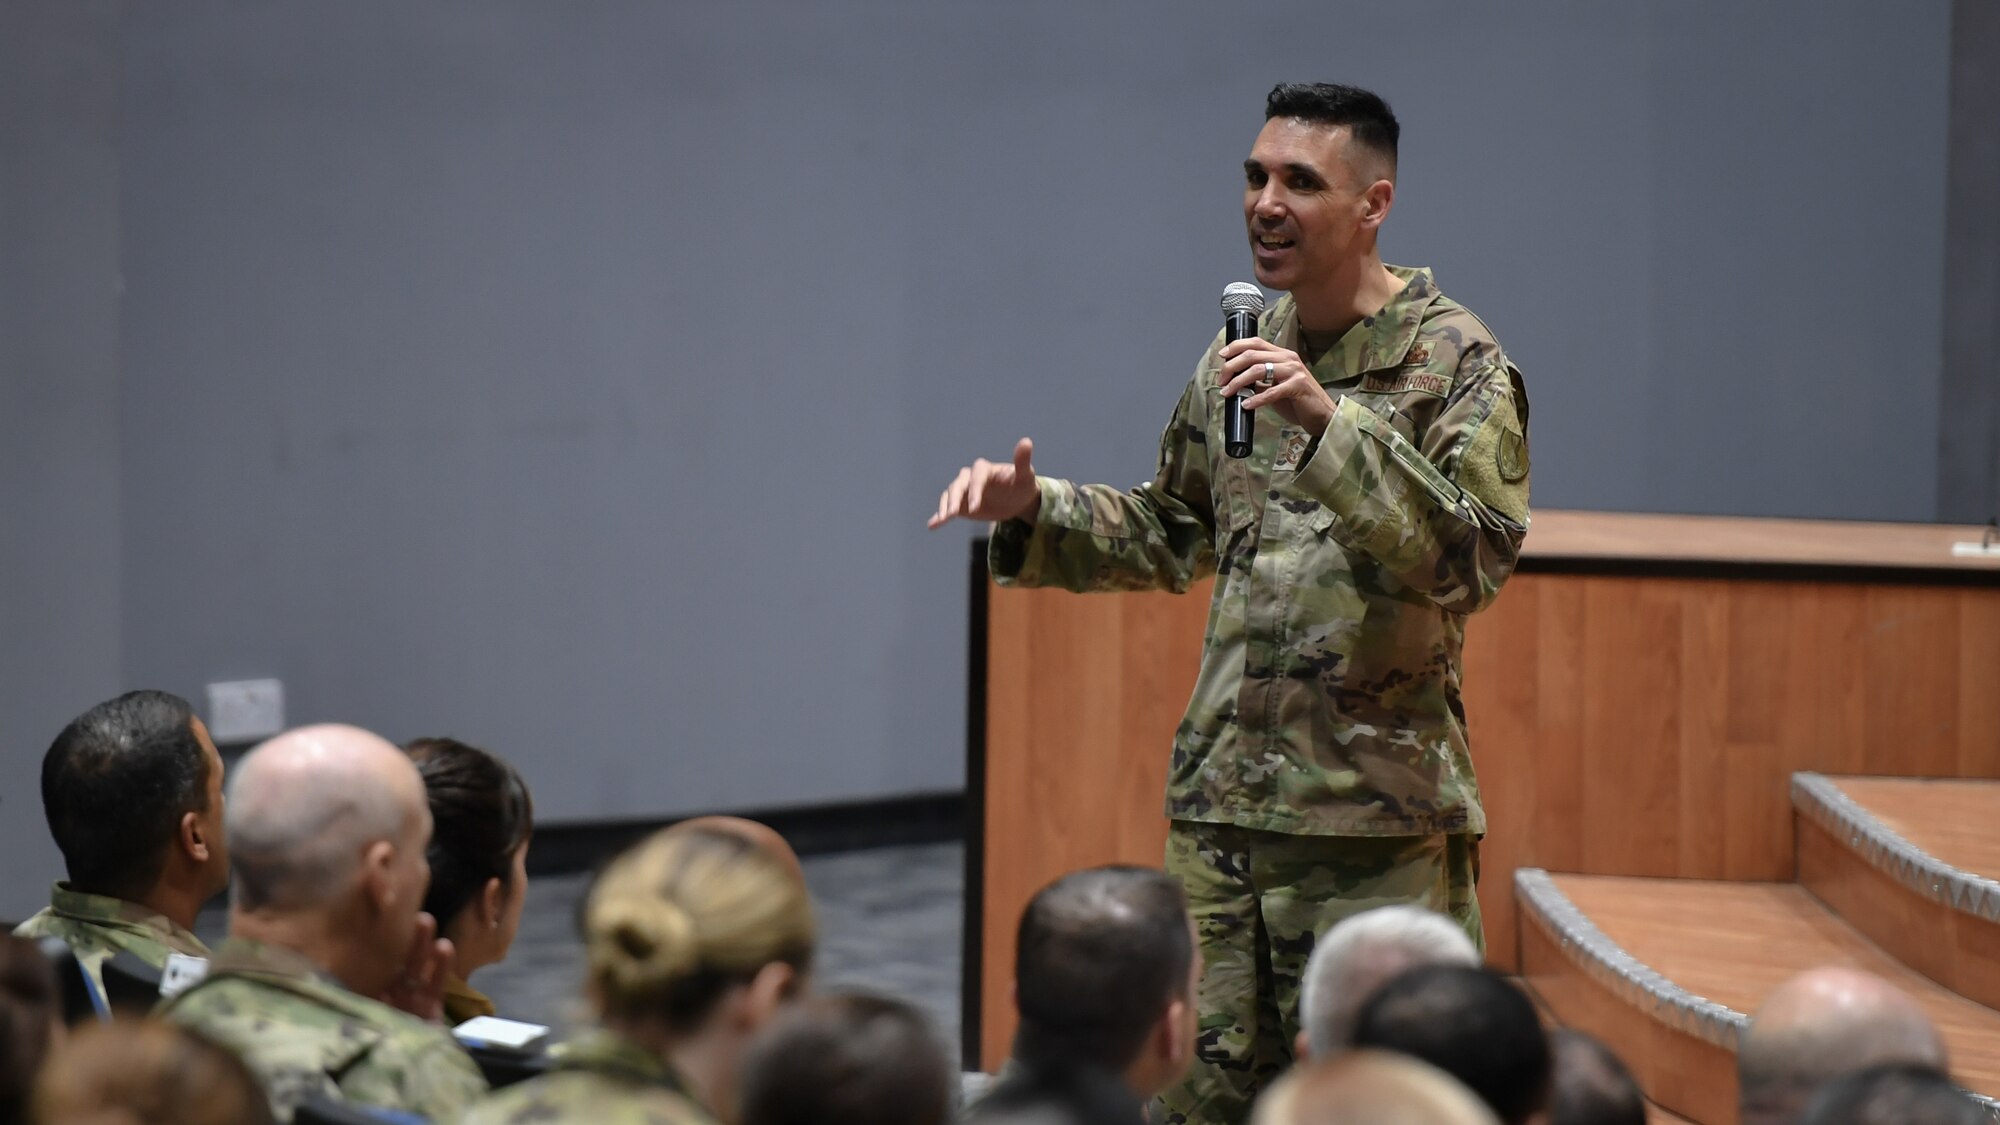 Chief Master Sgt. Shawn L. Drinkard, U.S. Air Forces Central Command command chief, addresses base personnel about the importance of the non-commissioned officer core values and resiliency during a visit to Ali Al Salem Air Base, Kuwait, Aug. 8, 2019. AFCENT leadership visited the 386th Air Expeditionary Wing to discuss how each Airman's role contributes to the mission, to take questions and address concerns. (U.S. Air Force photo by Staff Sgt. Mozer O. Da Cunha)